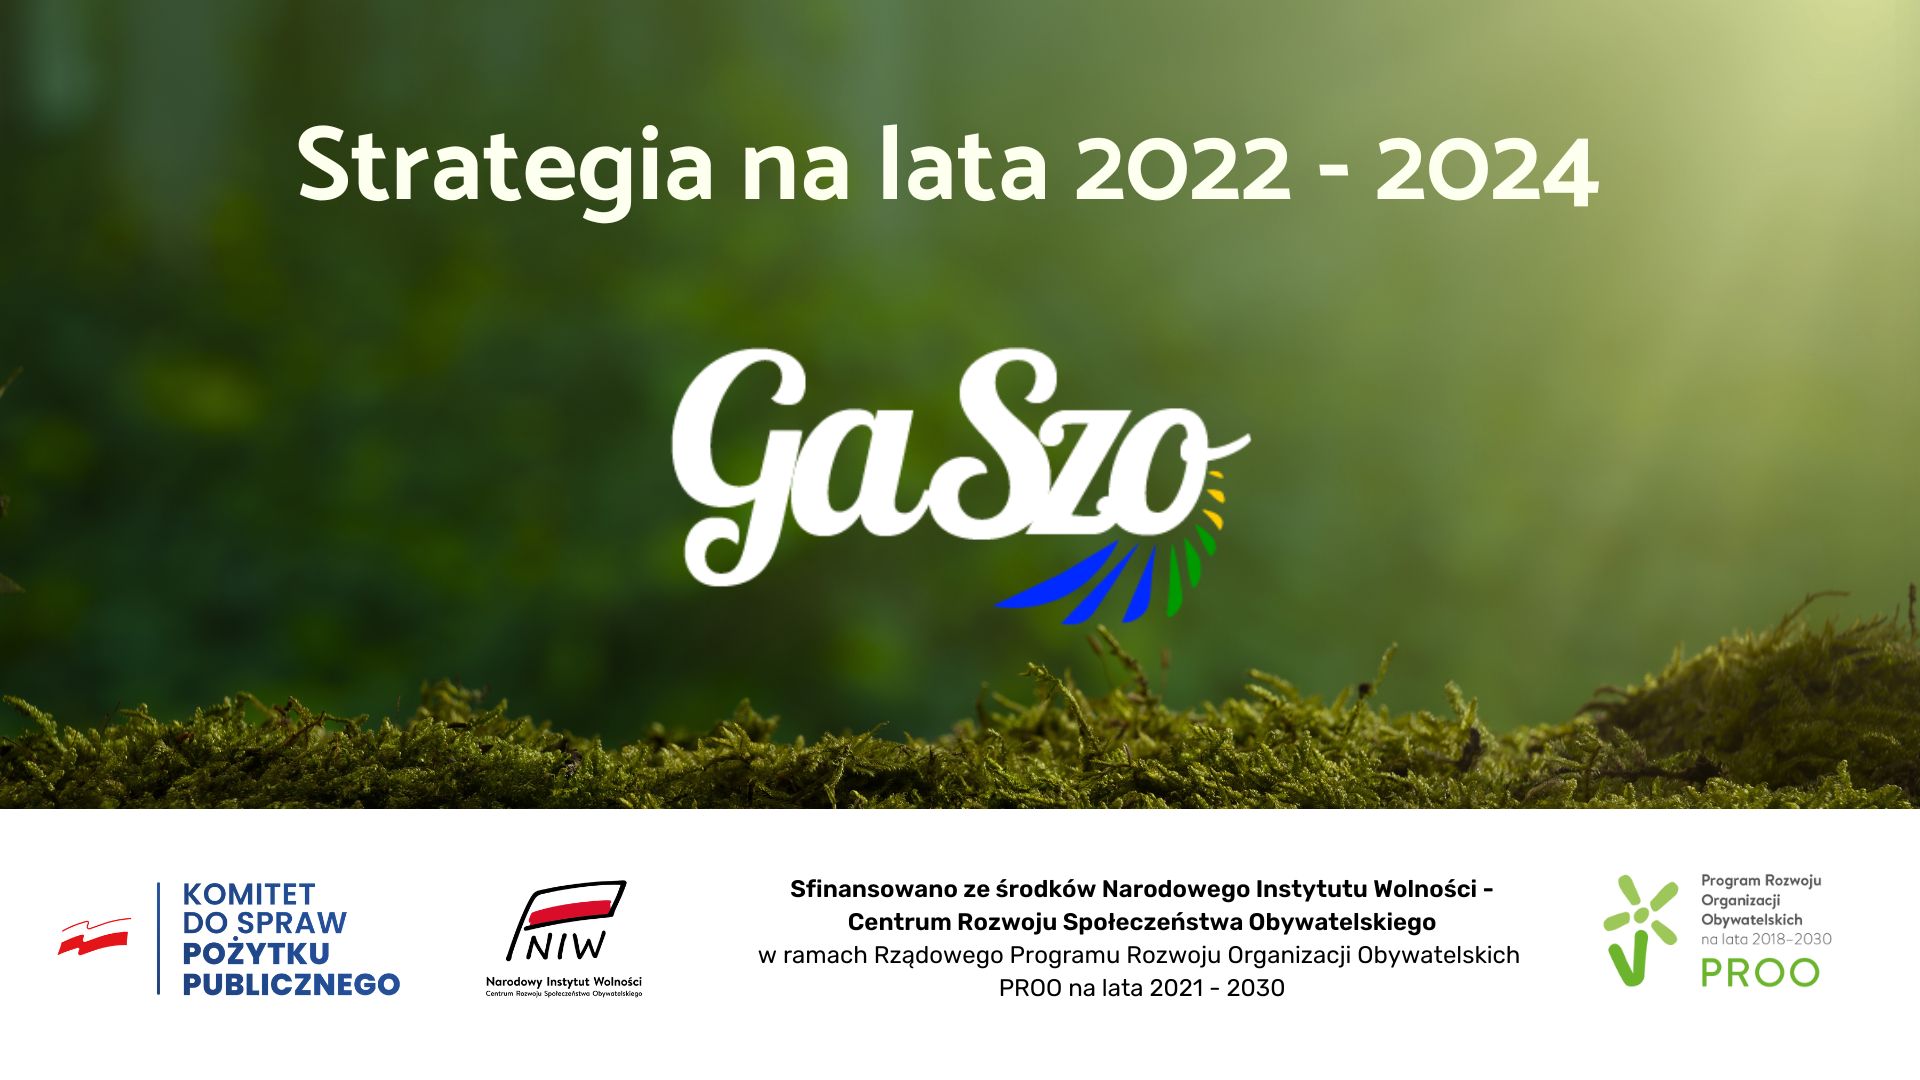 You are currently viewing Strategia GaSzo na lata 2022-2024